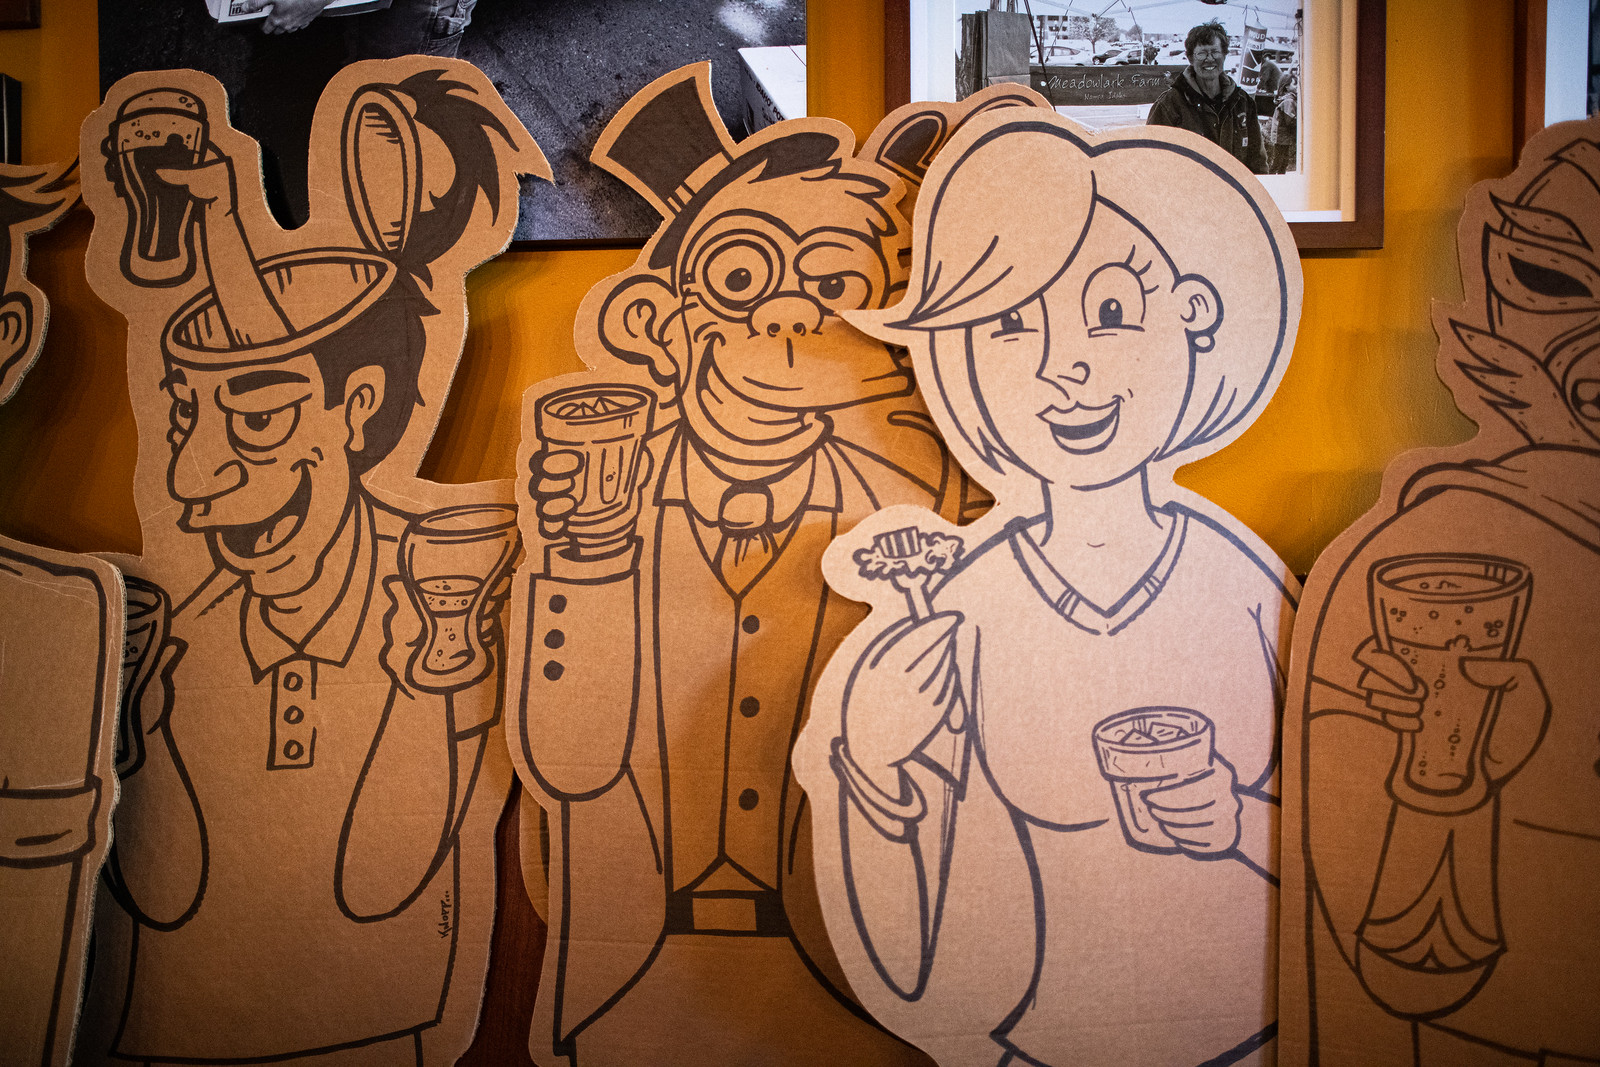 Temporary Diners: Creating community with cardboard cutouts